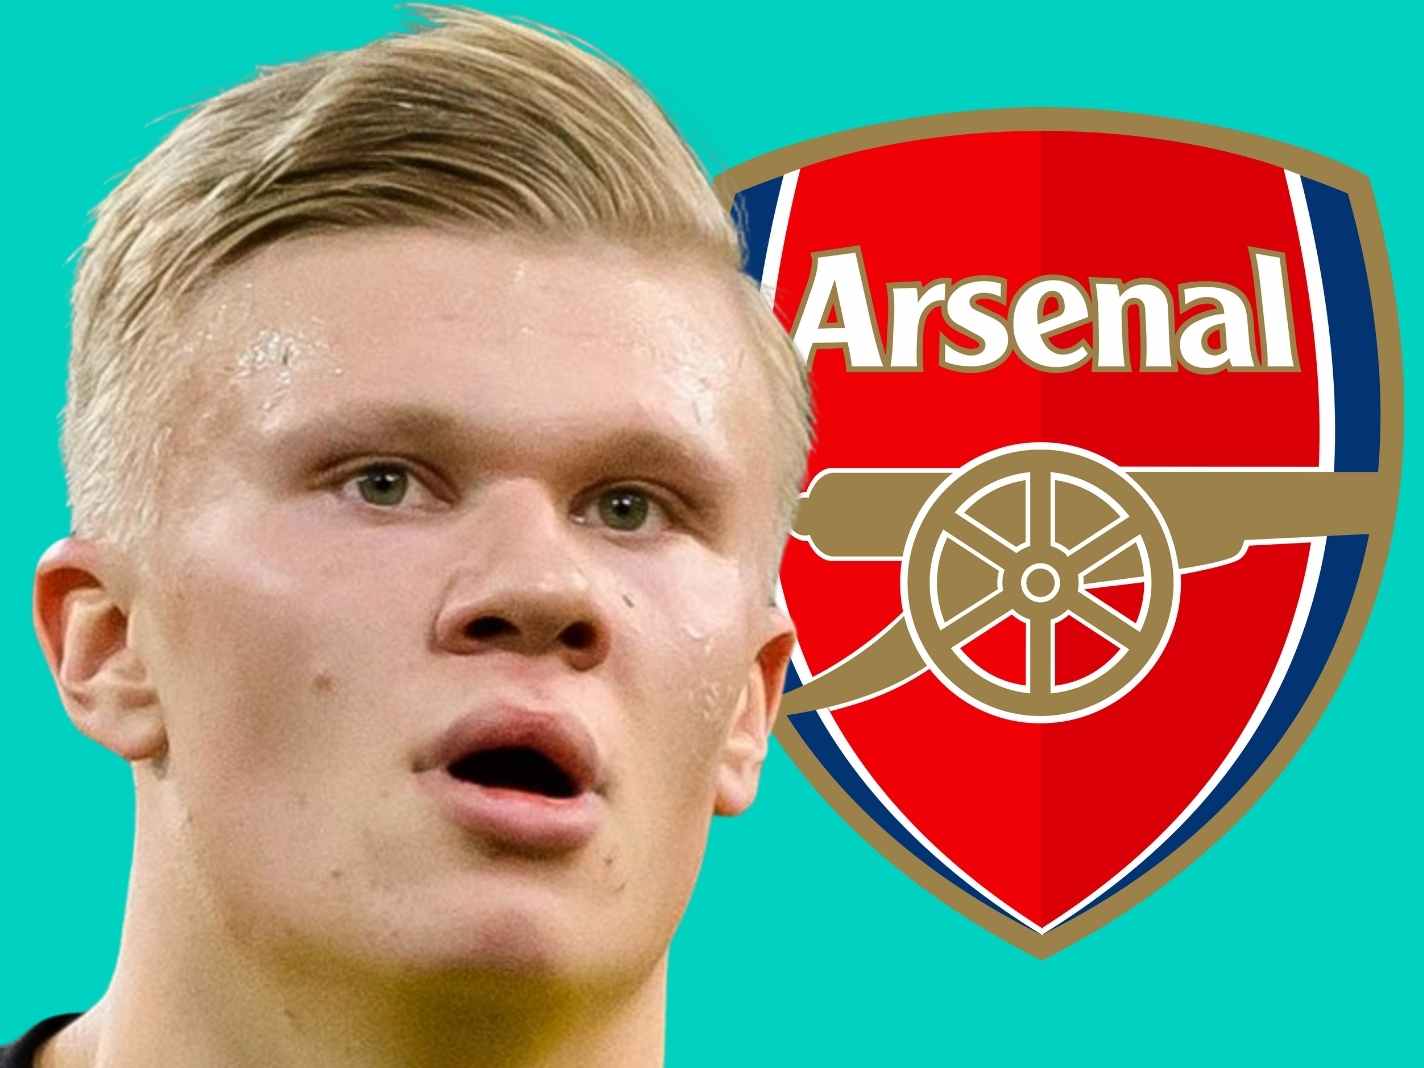 Erling Haaland's Arsenal connection